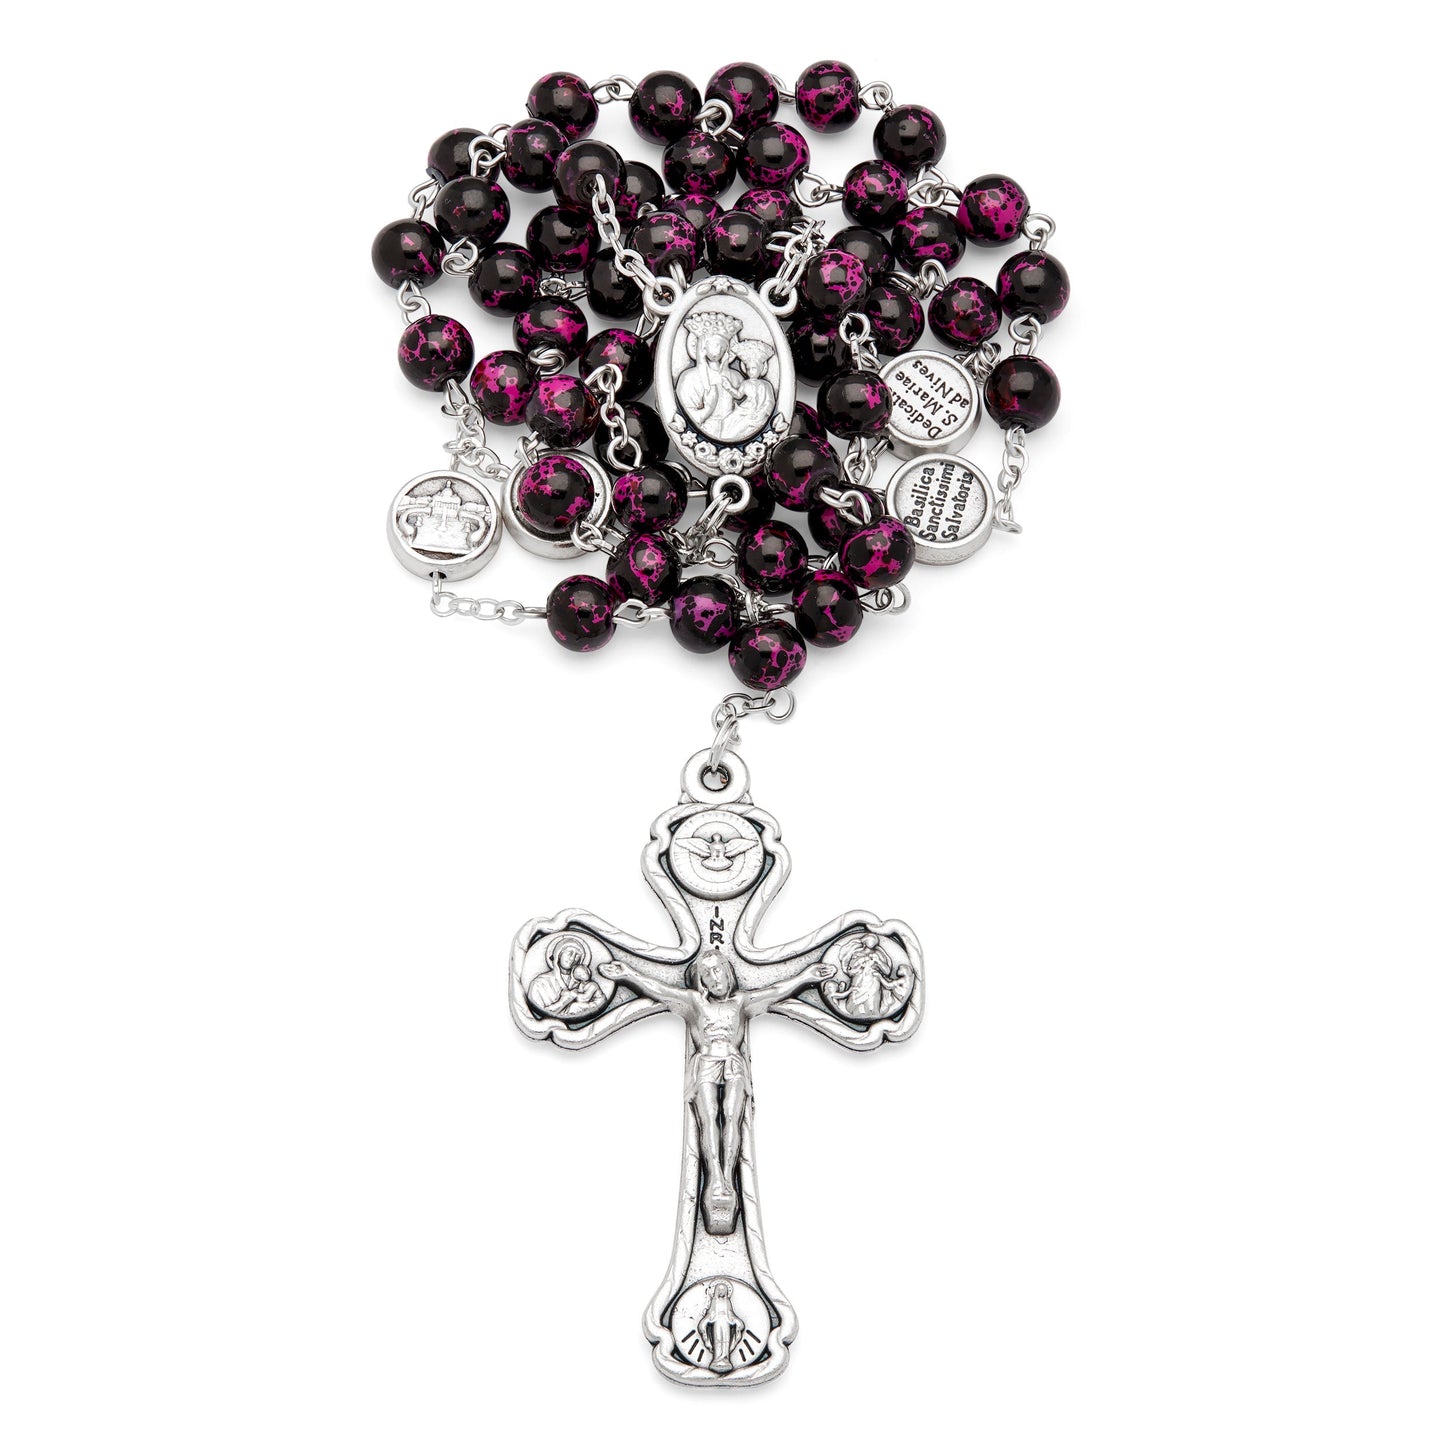 MONDO CATTOLICO Prayer Beads 48 cm (18.9 in) / 6 mm (0.24 in) Variegated Purple Rosary